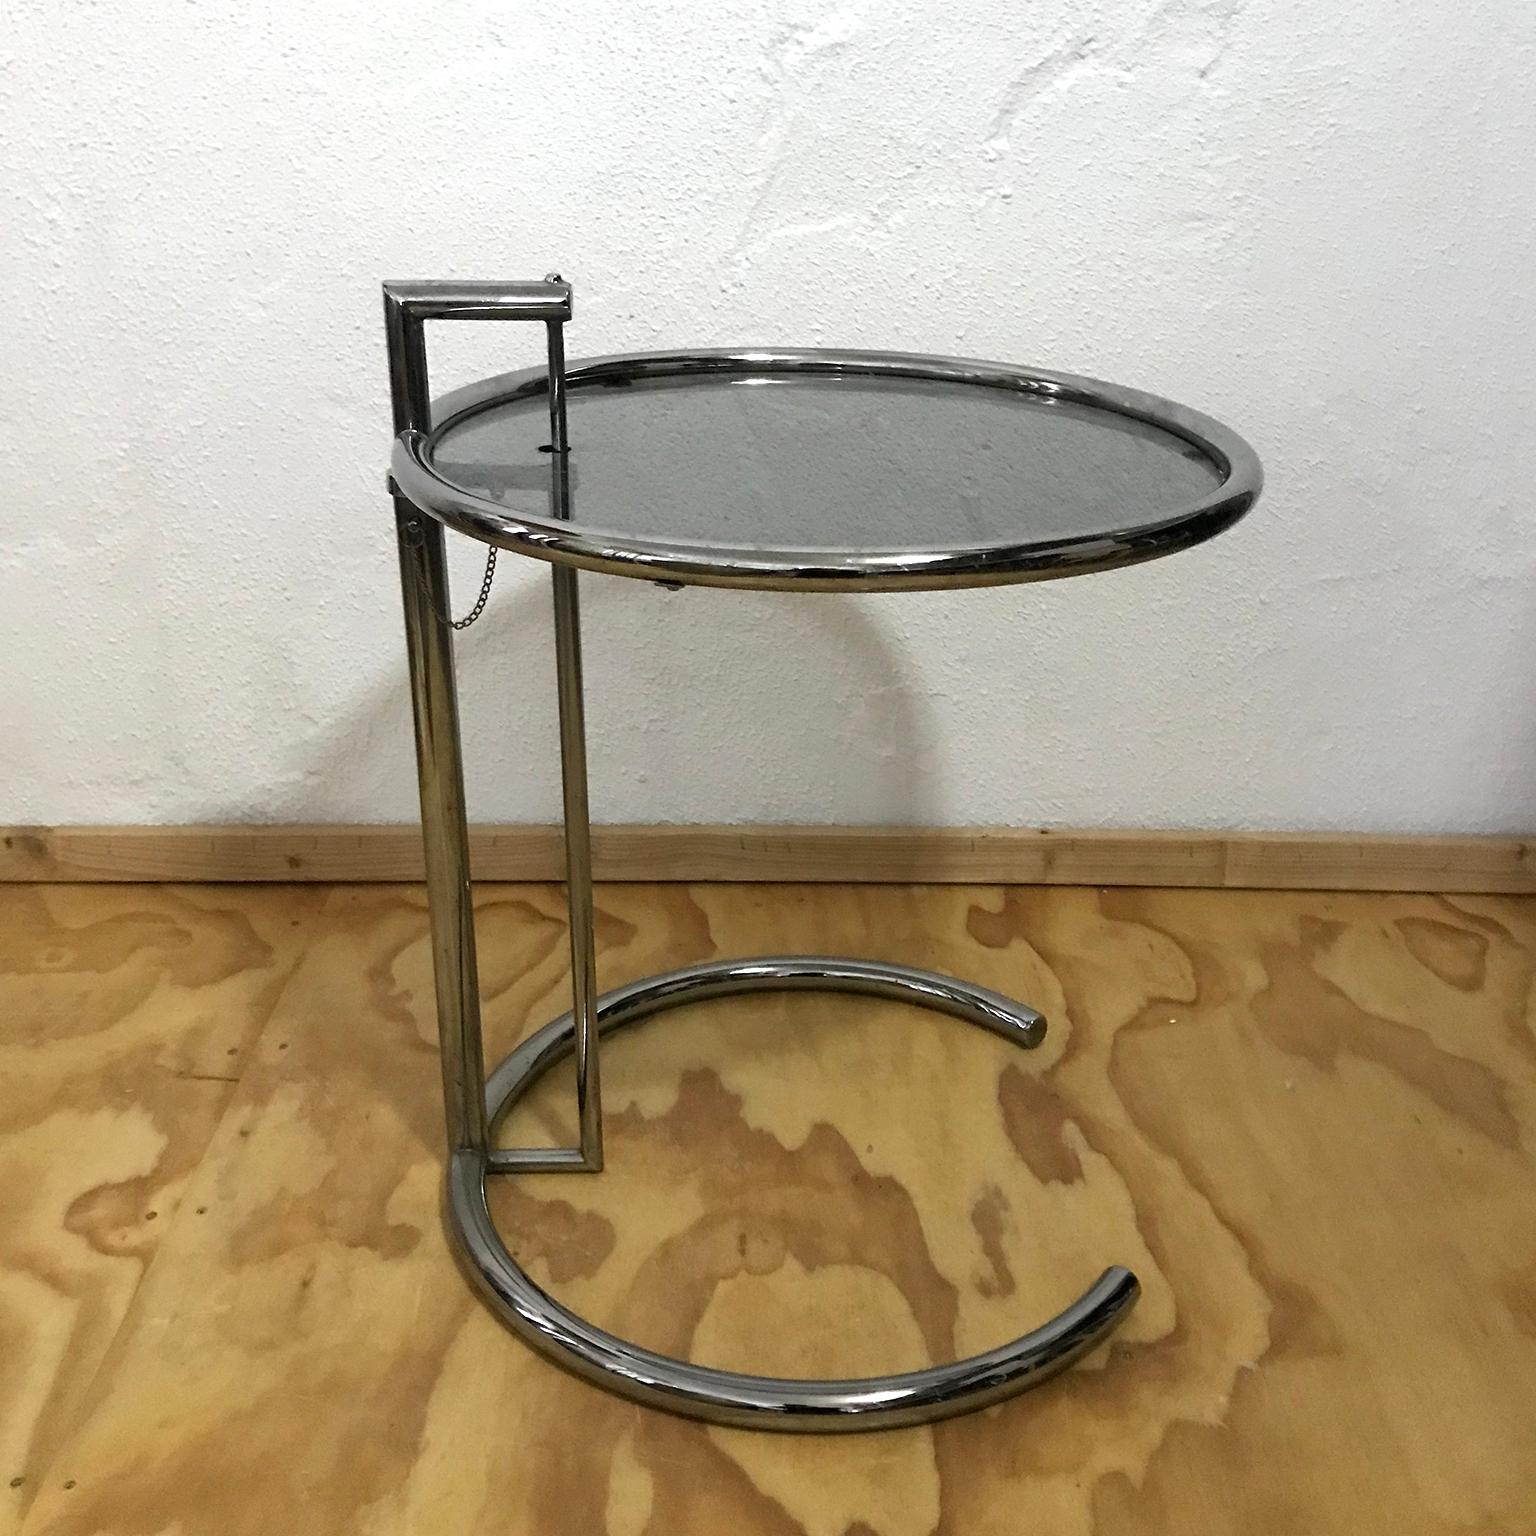 
Adjustable Table E 1027

Designer	Eileen Gray
Date	1927
Materials	: On Request ; Stainless steel, tempered glass, Smoked Glass or Clear Glass 
Style / tradition	Modernist
Height	54 cm (21 in)—93 cm (37 in)  Adjustable Table
Table E 1027 is an